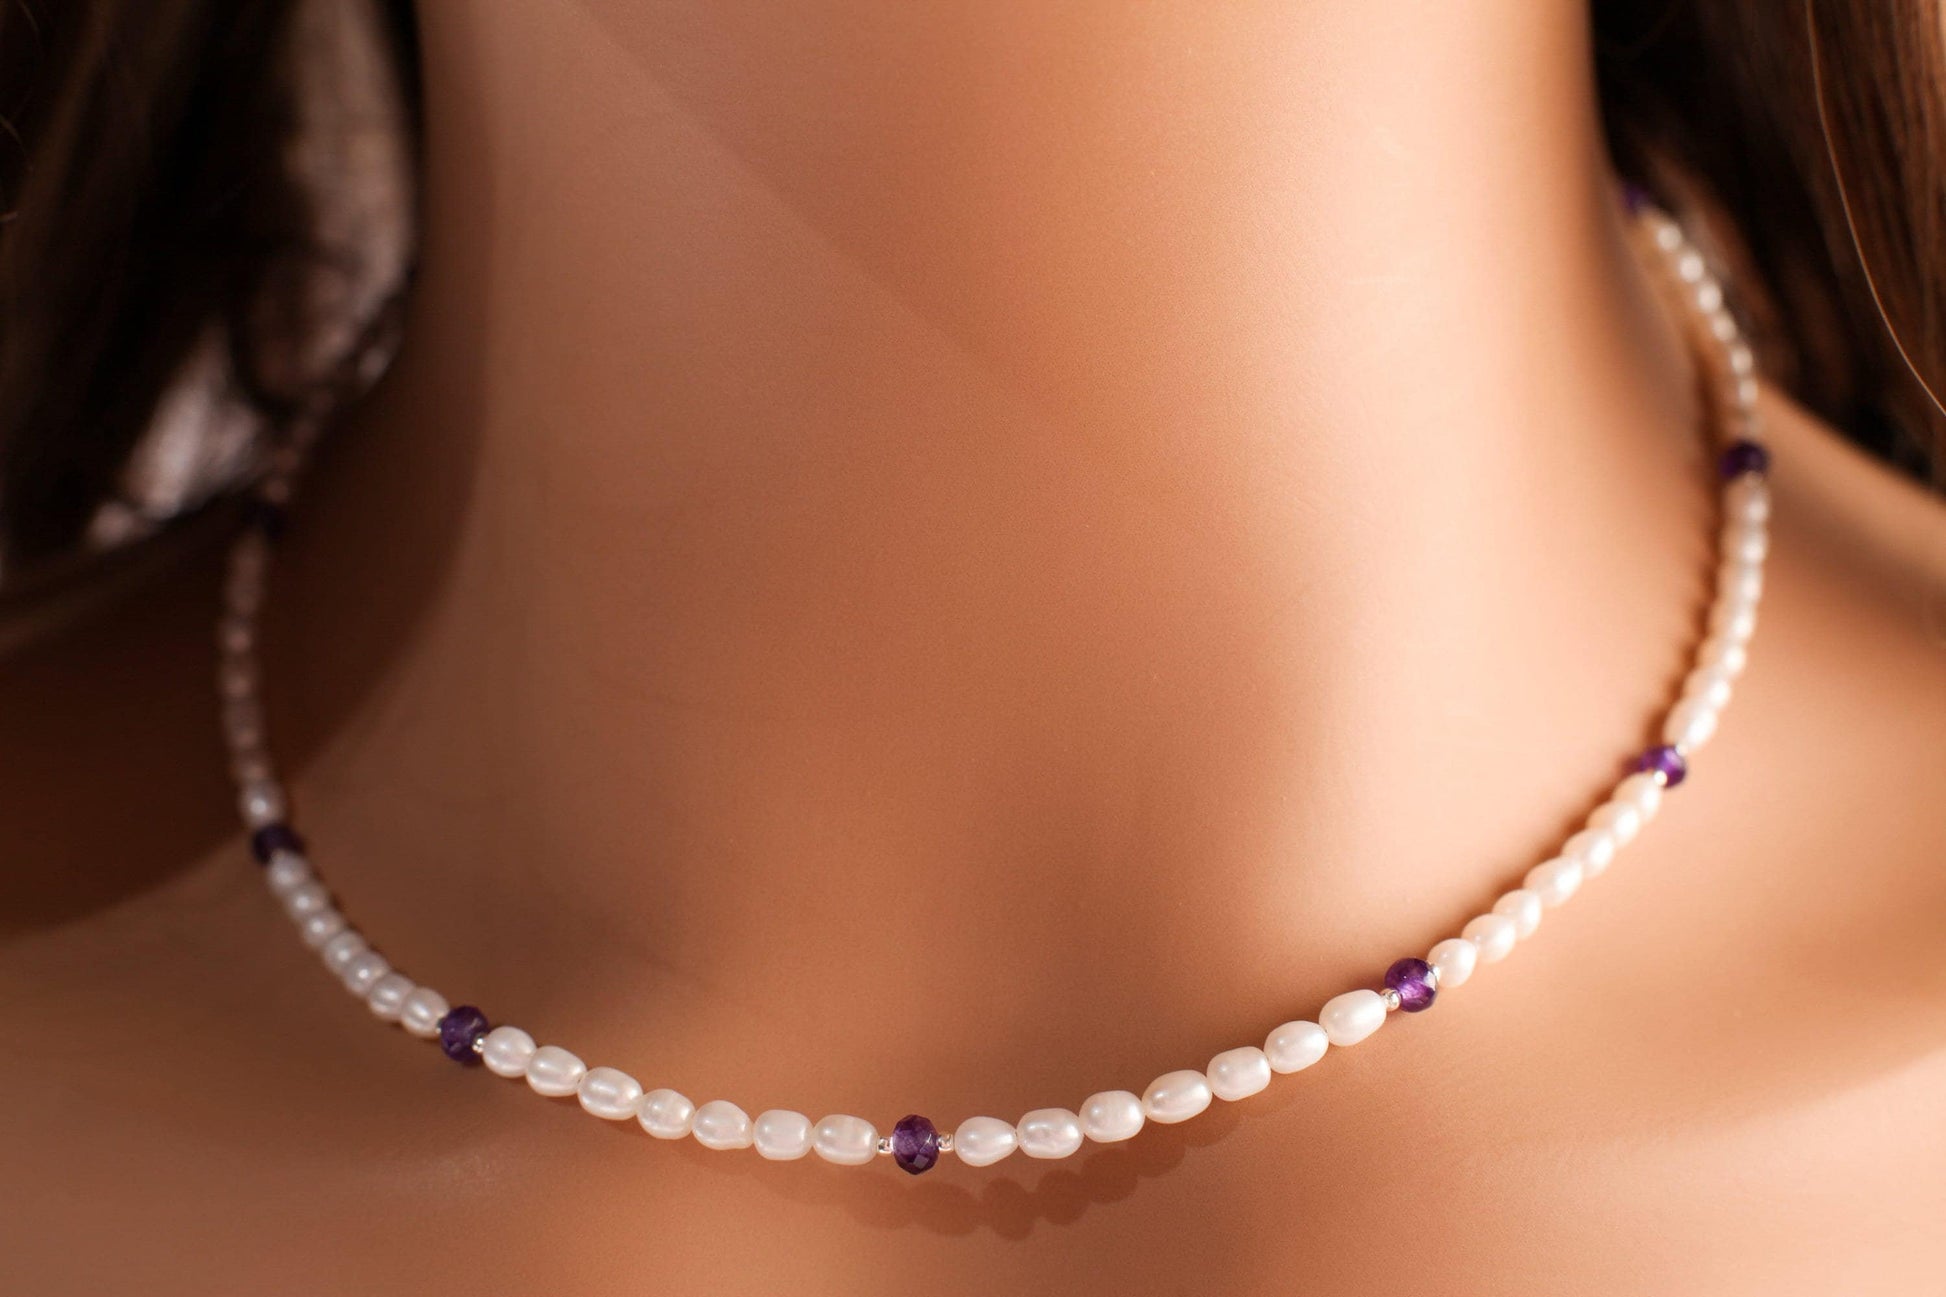 Freshwater Pearl with Genuine Amethyst or Garnet, 925 Sterling Silver spacer and Clasp Necklace, Choker, Layering, Minimalist Holiday Gift